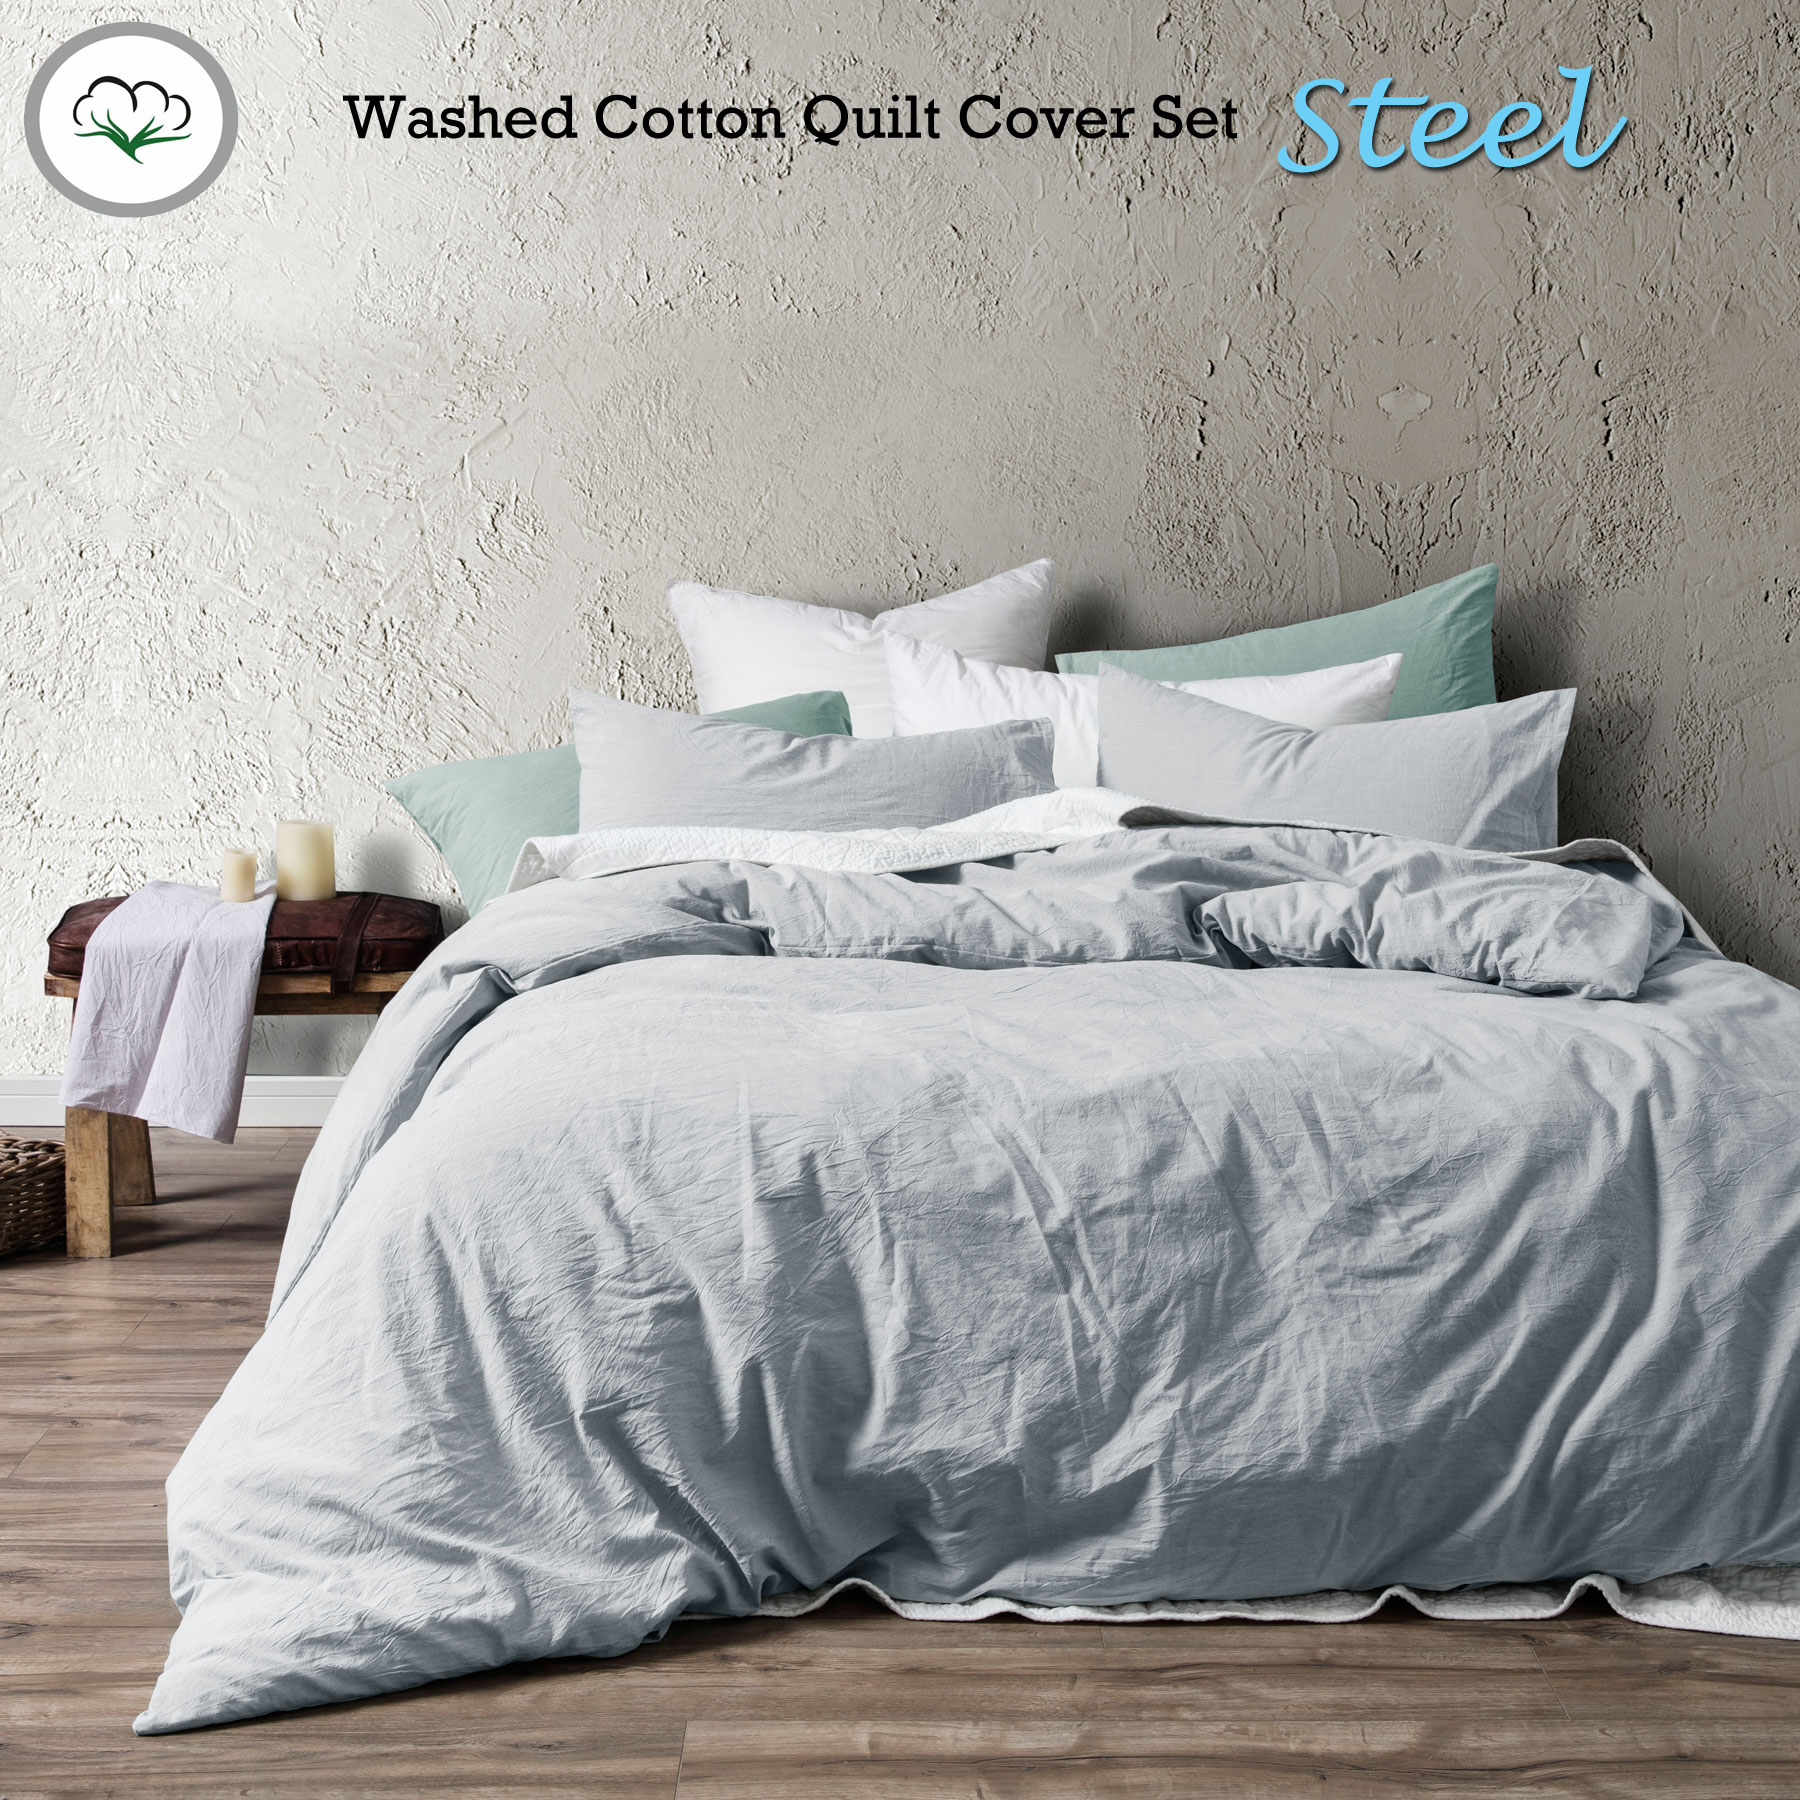 3 Pce Washed Cotton Quilt Duvet Cover Set Steel Blue By